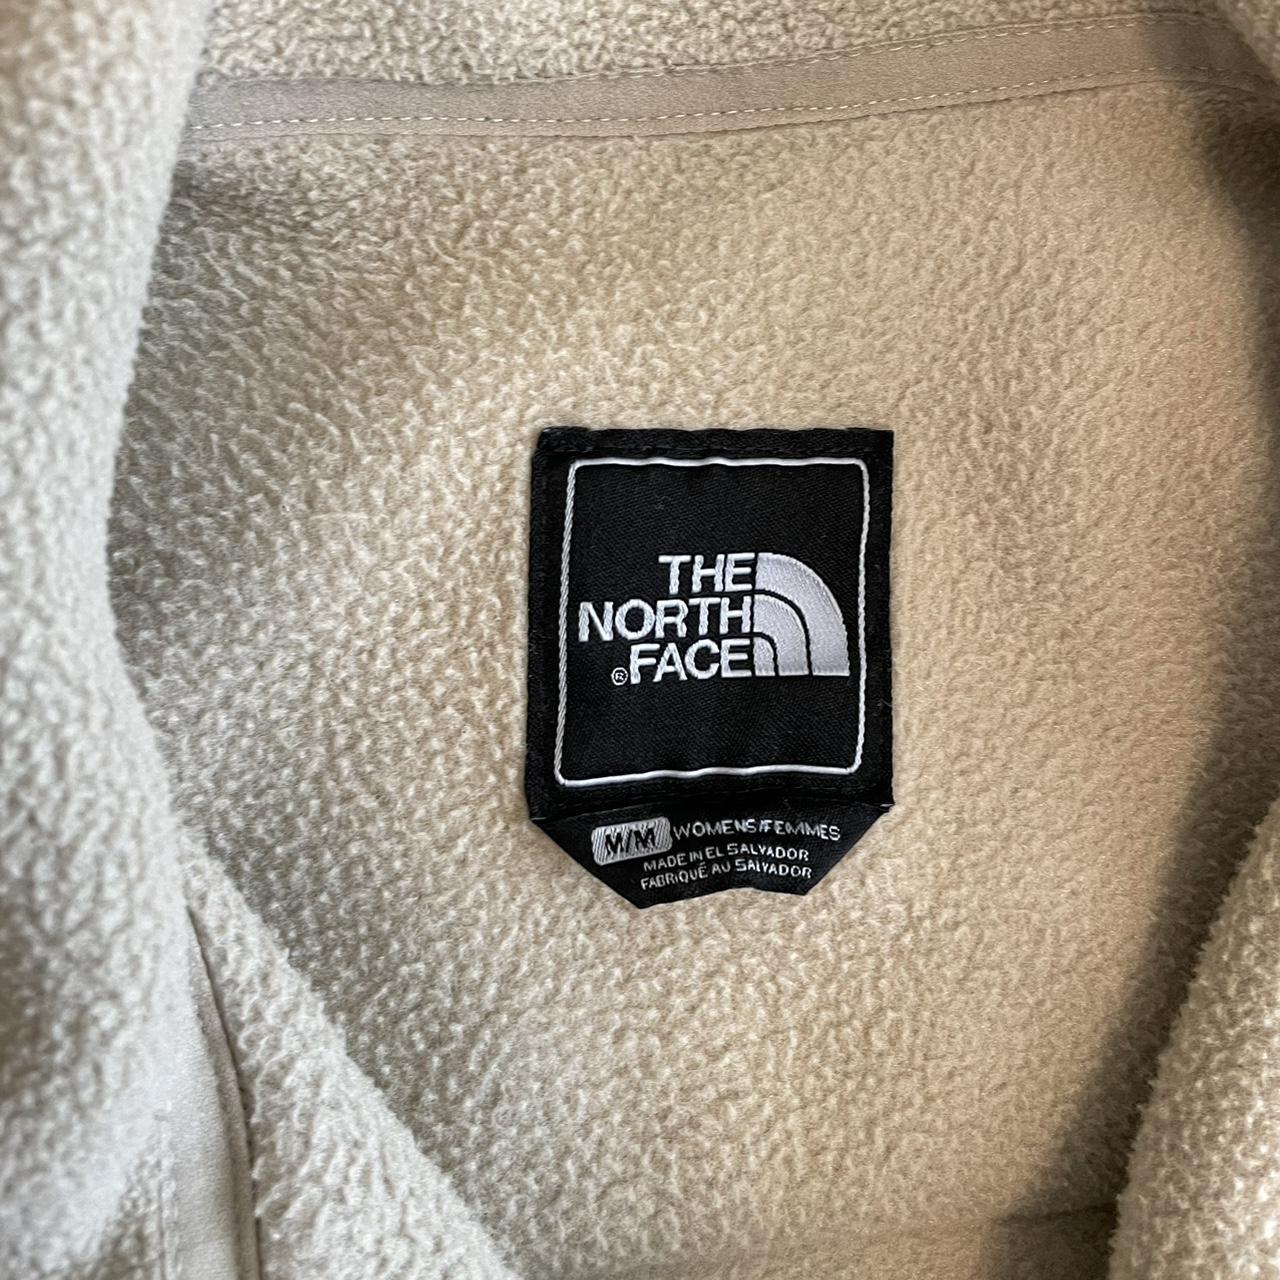 The North Face Women's Cream and Black Jacket (4)